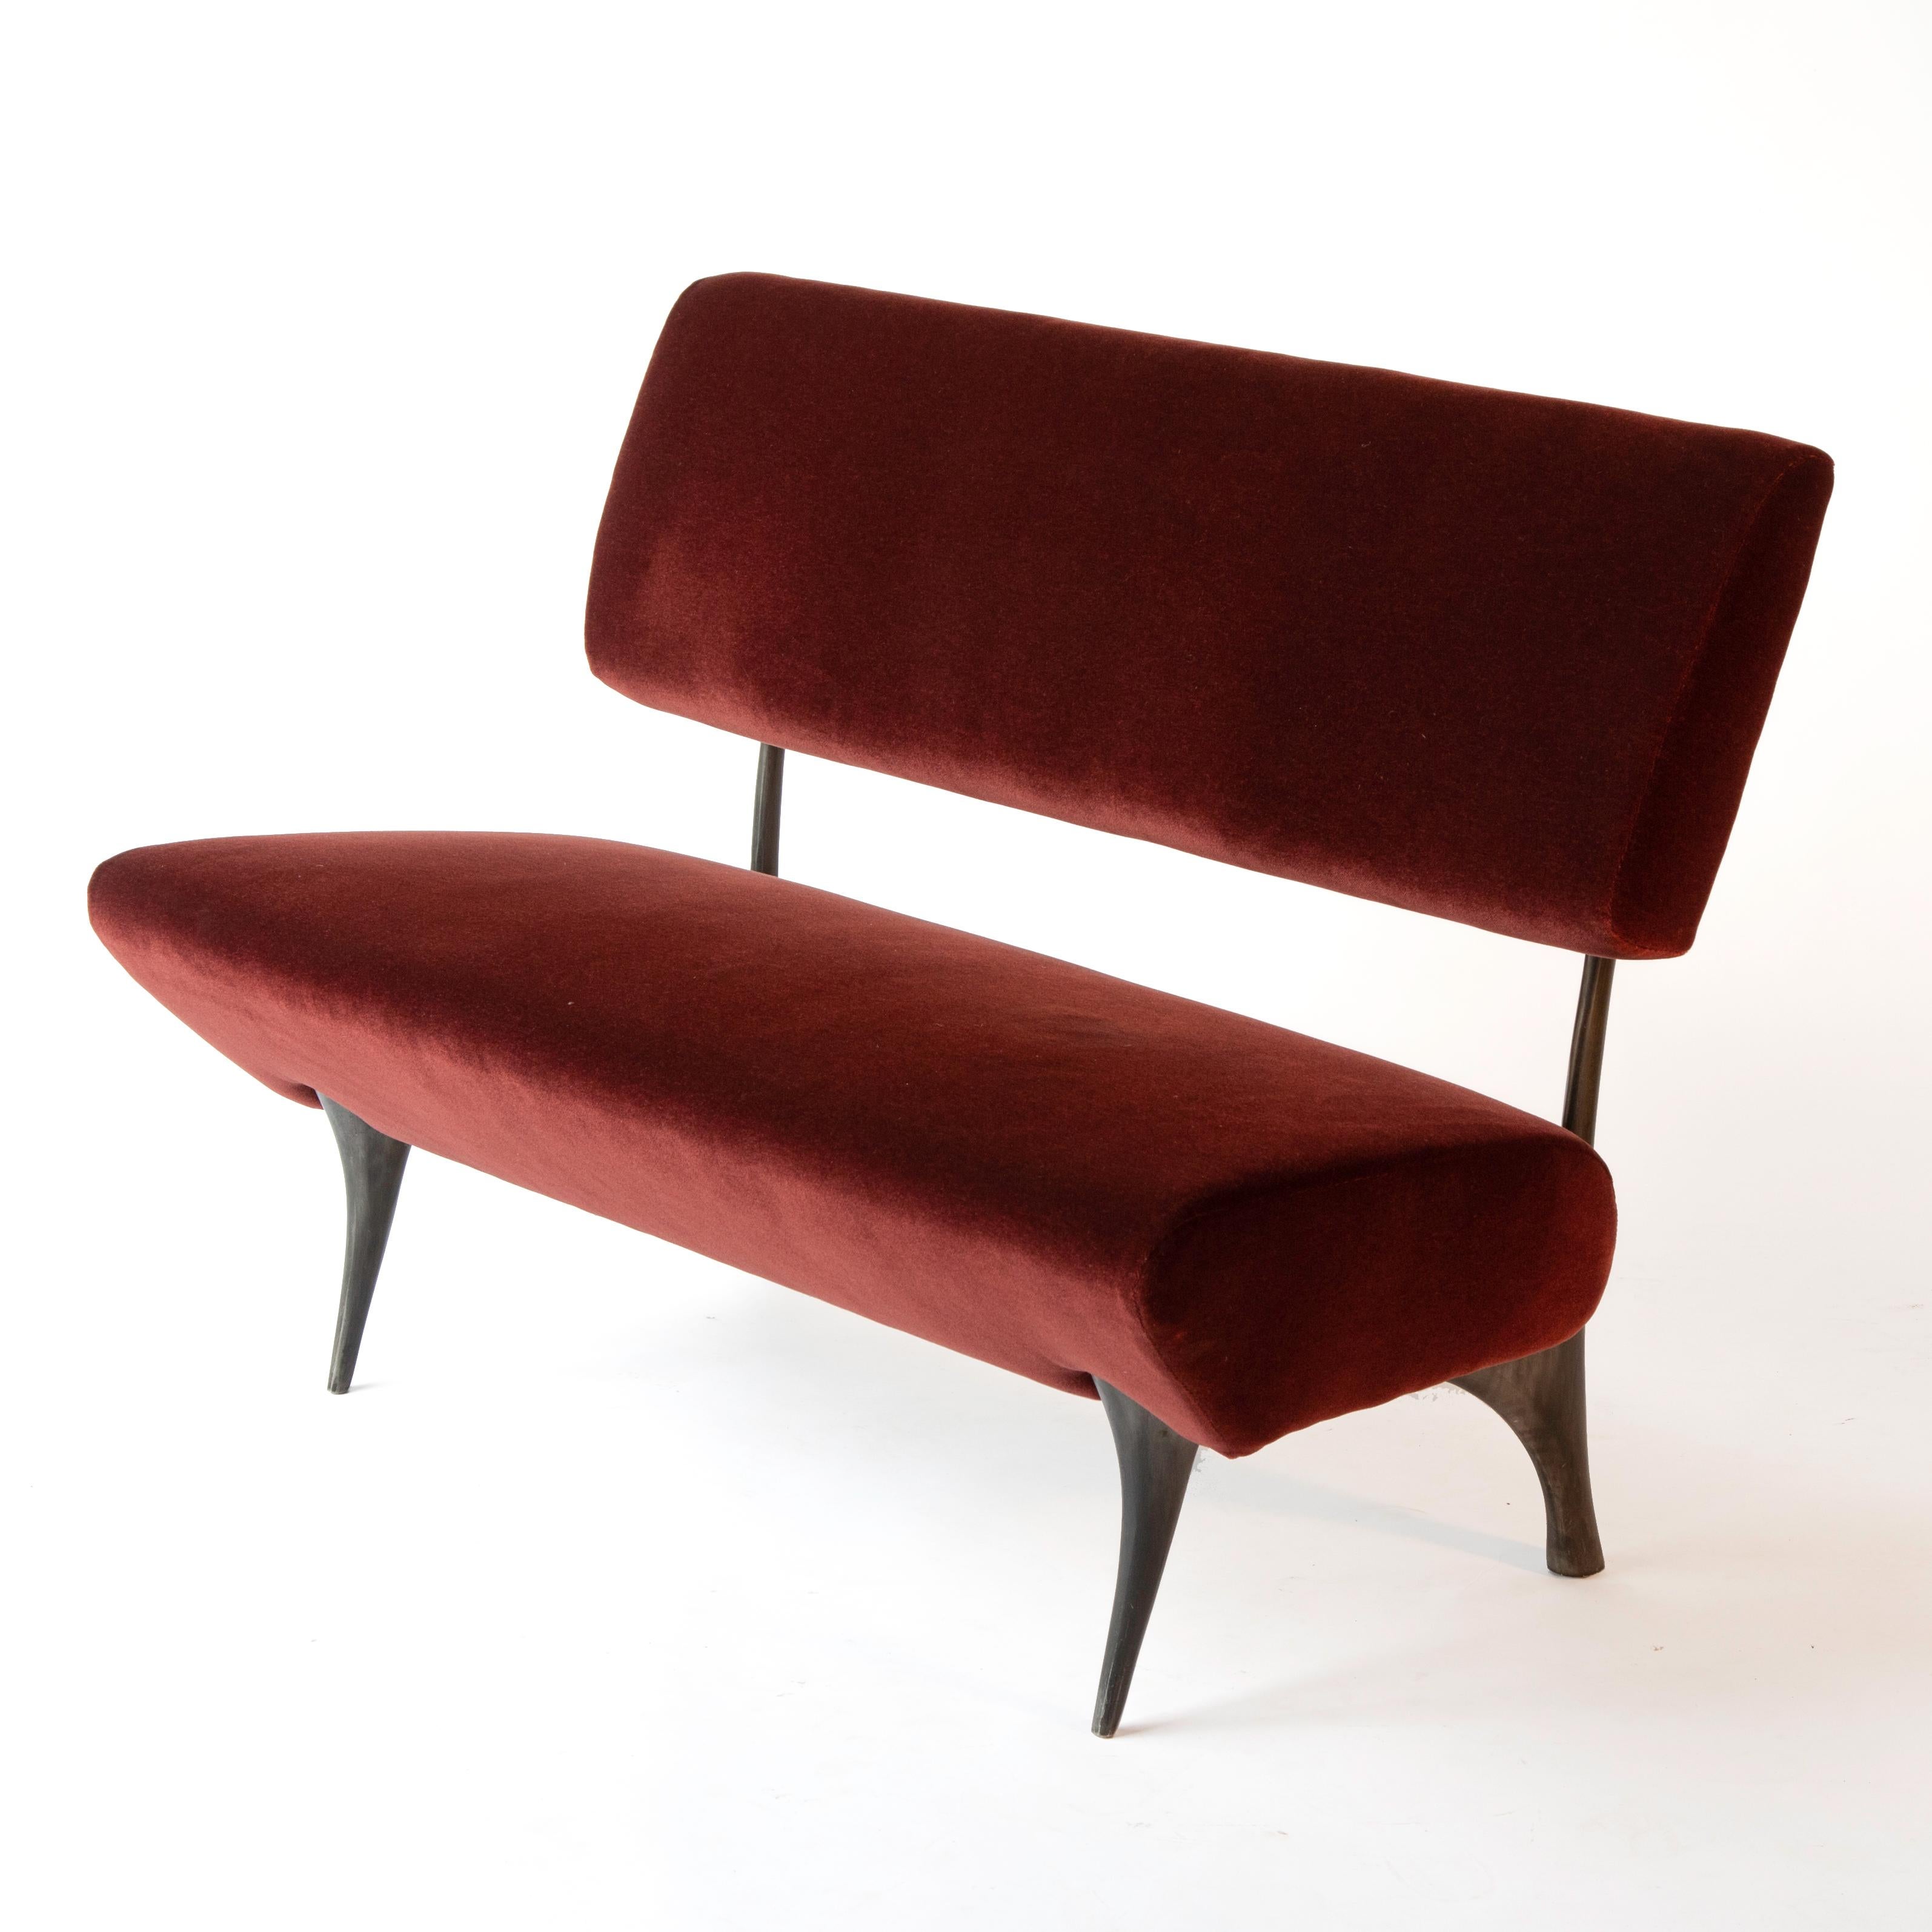 Twig Loveseat , Patinated Recycled Cast Aluminum, 100% Wool Mohair Upholstery, Jordan Mozer (b.1958).  Made in Chicago, USA 1997/2015. This is a 2015 variation on the original 1997 design. Provenance: collection of the artist. Signature cast into